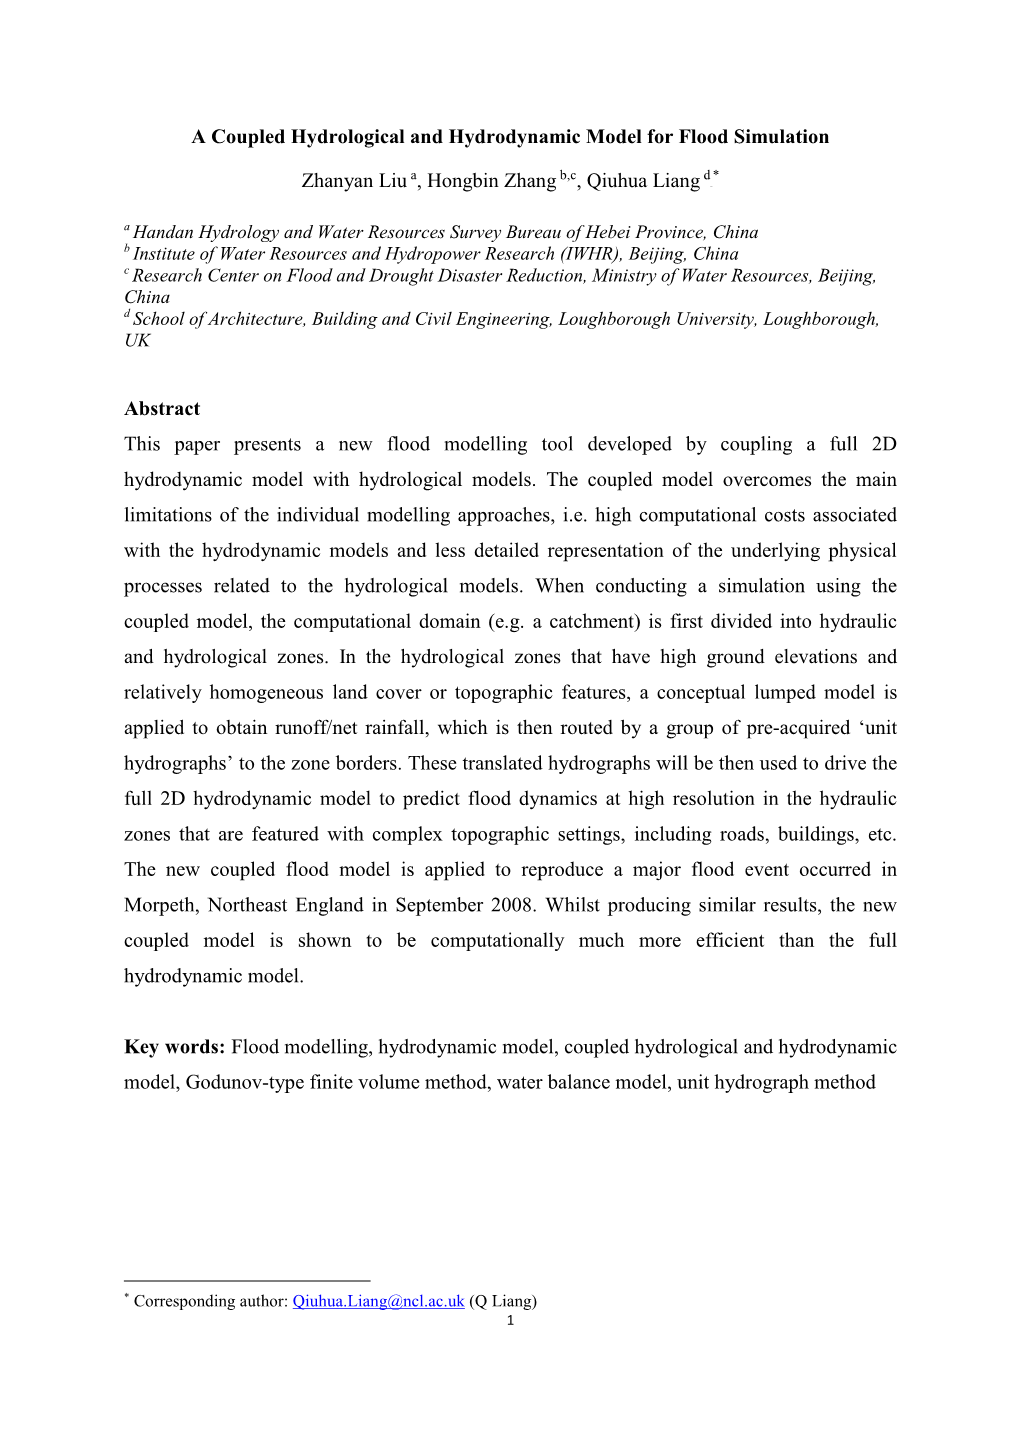 A Coupled Hydrological and Hydrodynamic Model for Flood Simulation